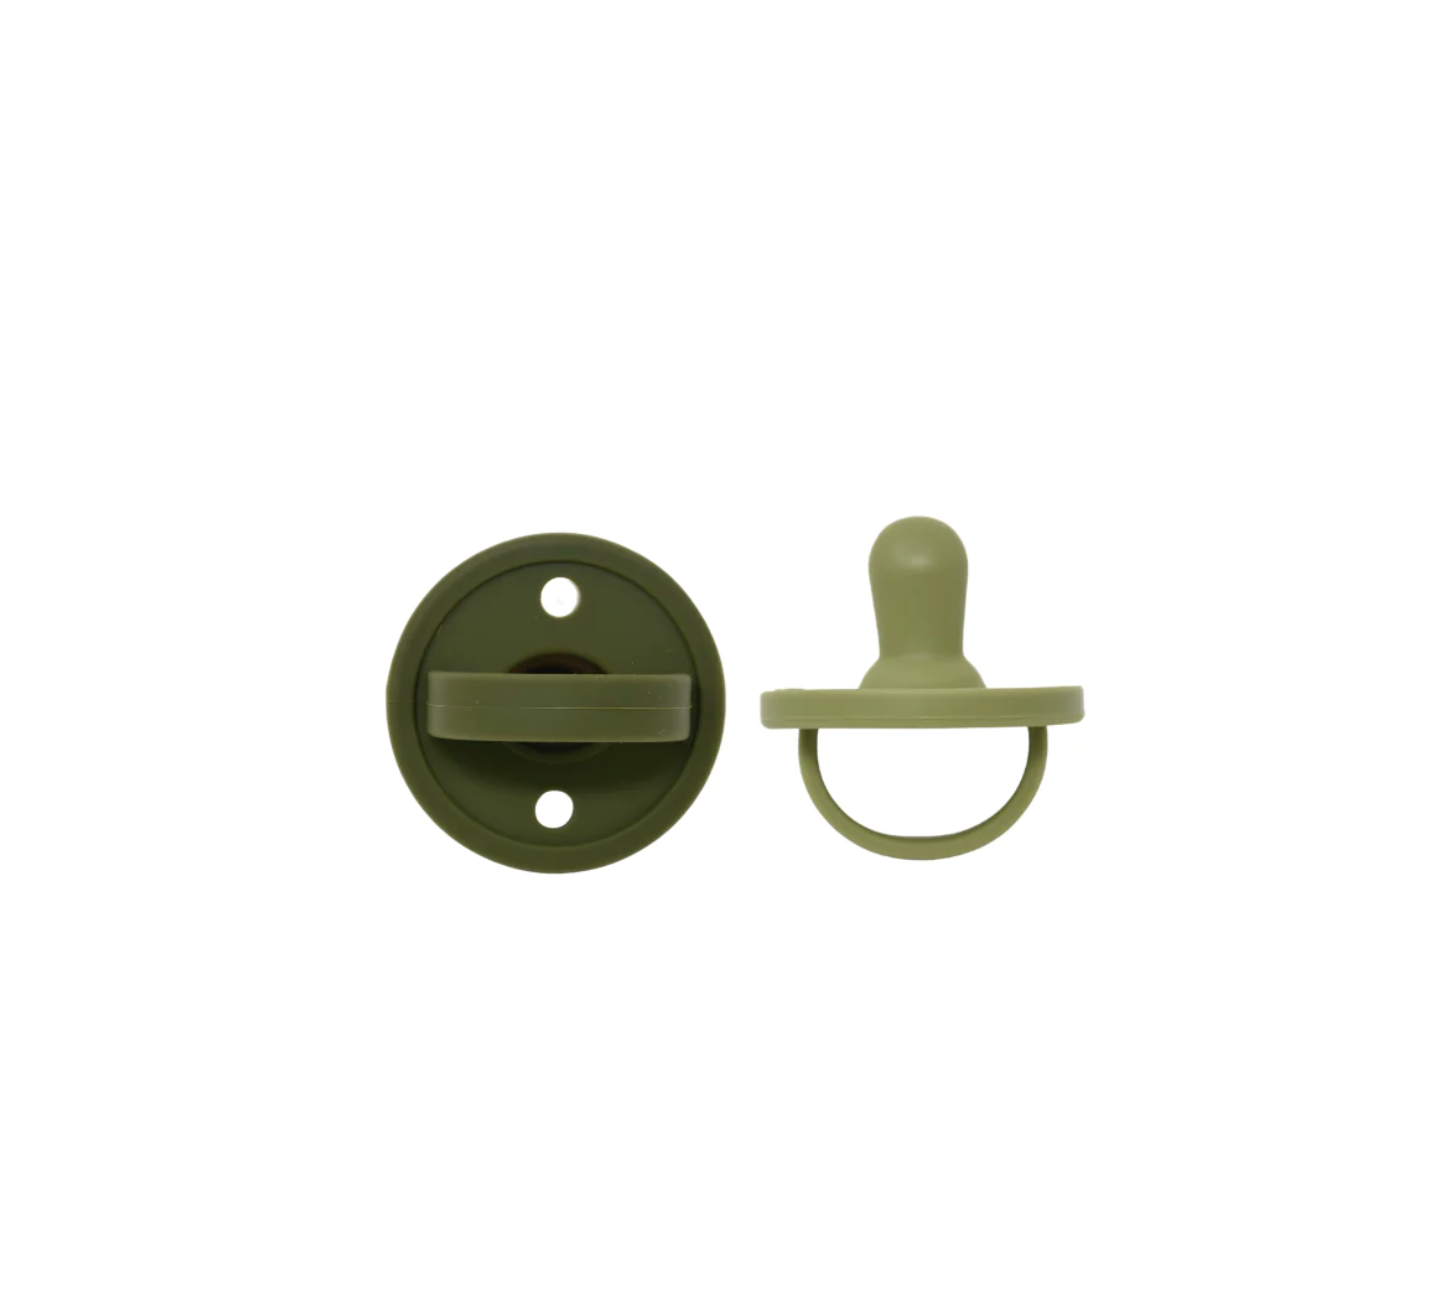 The Mod Pacifier 2-Pack